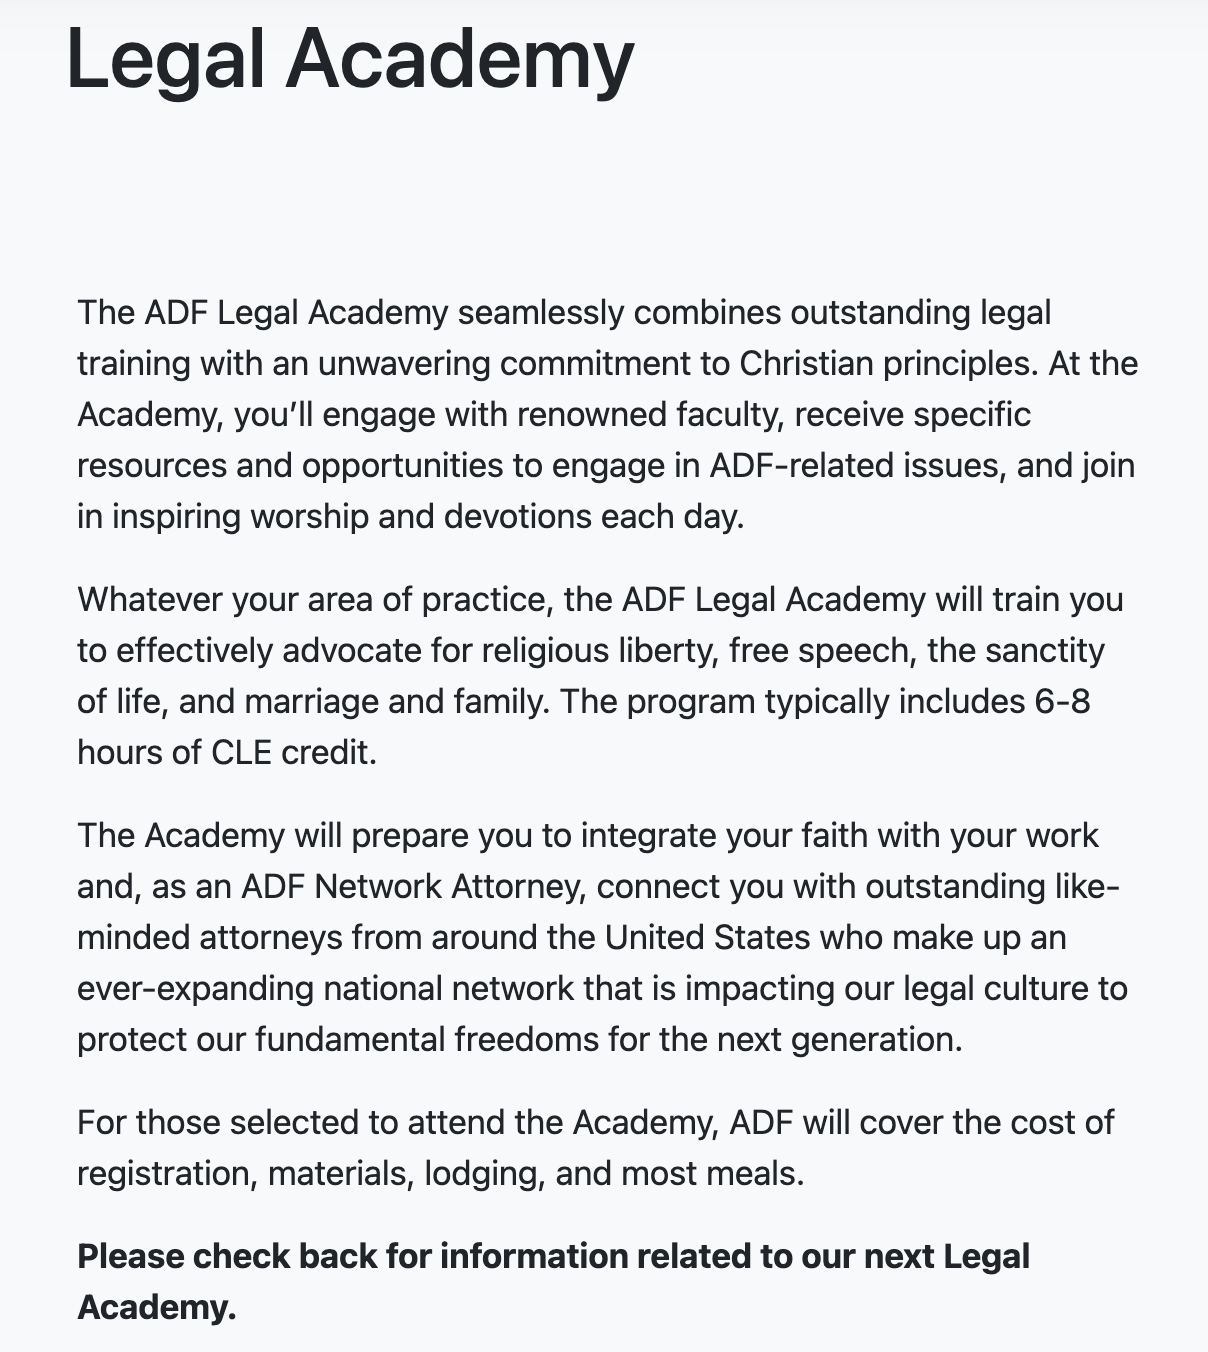 Legal Academy The ADF Legal Academy seamlessly combines outstanding legal training with an unwavering commitment to Christian principles. At the Academy, you’ll engage with renowned faculty, receive specific resources and opportunities to engage in ADF-related issues, and join in inspiring worship and devotions each day.  Whatever your area of practice, the ADF Legal Academy will train you to effectively advocate for religious liberty, free speech, the sanctity of life, and marriage and family. The program typically includes 6-8 hours of CLE credit.  The Academy will prepare you to integrate your faith with your work and, as an ADF Network Attorney, connect you with outstanding like-minded attorneys from around the United States who make up an ever-expanding national network that is impacting our legal culture to protect our fundamental freedoms for the next generation.  For those selected to attend the Academy, ADF will cover the cost of registration, materials, lodging, and most meals.  Please check back for information related to our next Legal Academy.